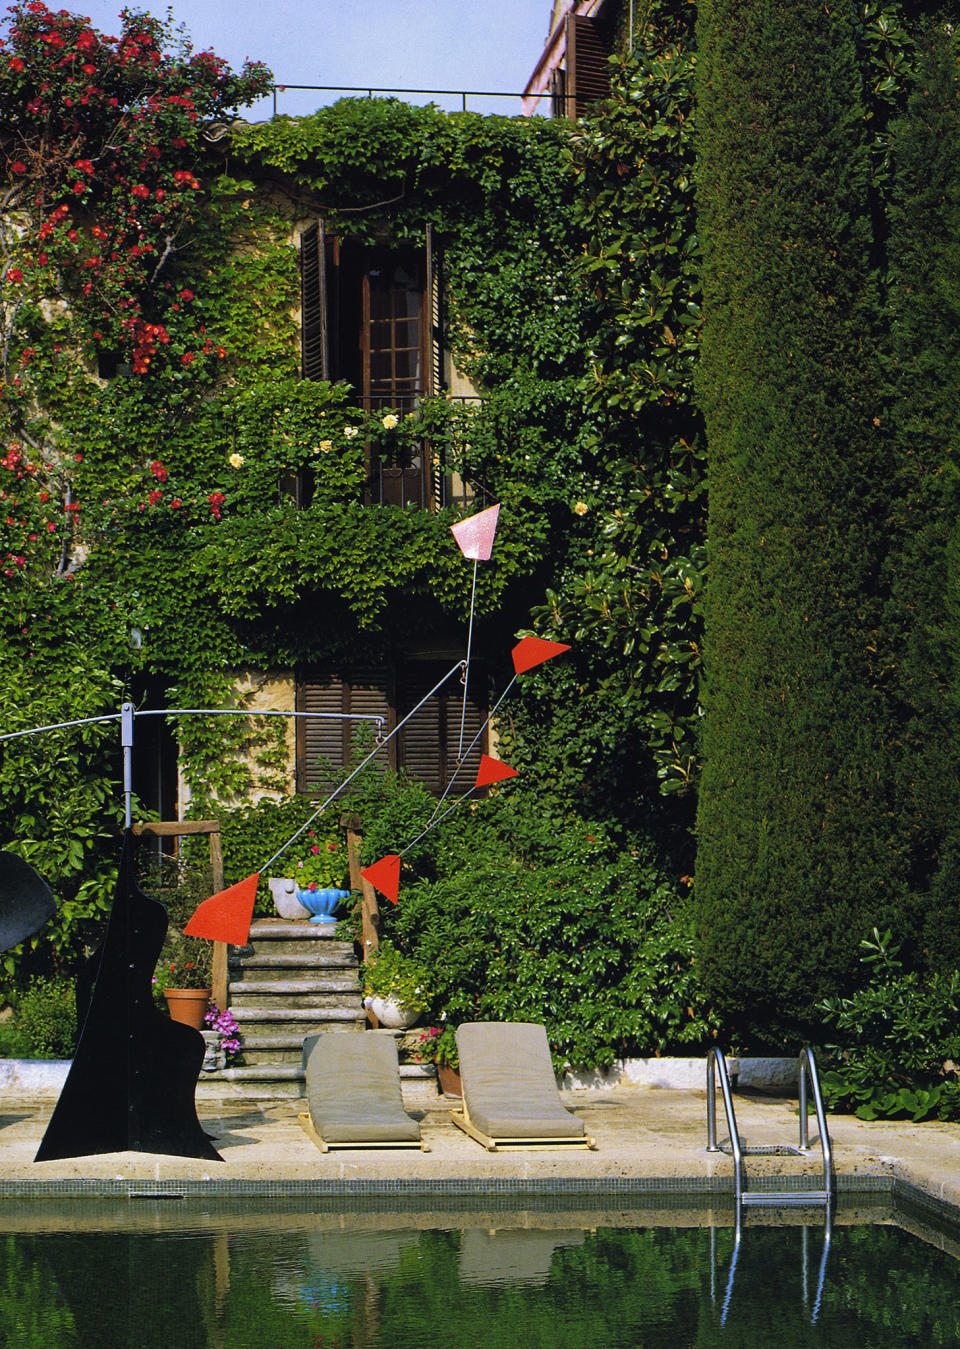 The Alexander Calder mobile by the pool of La Colombe d’Or. - Credit: Courtesy Photo